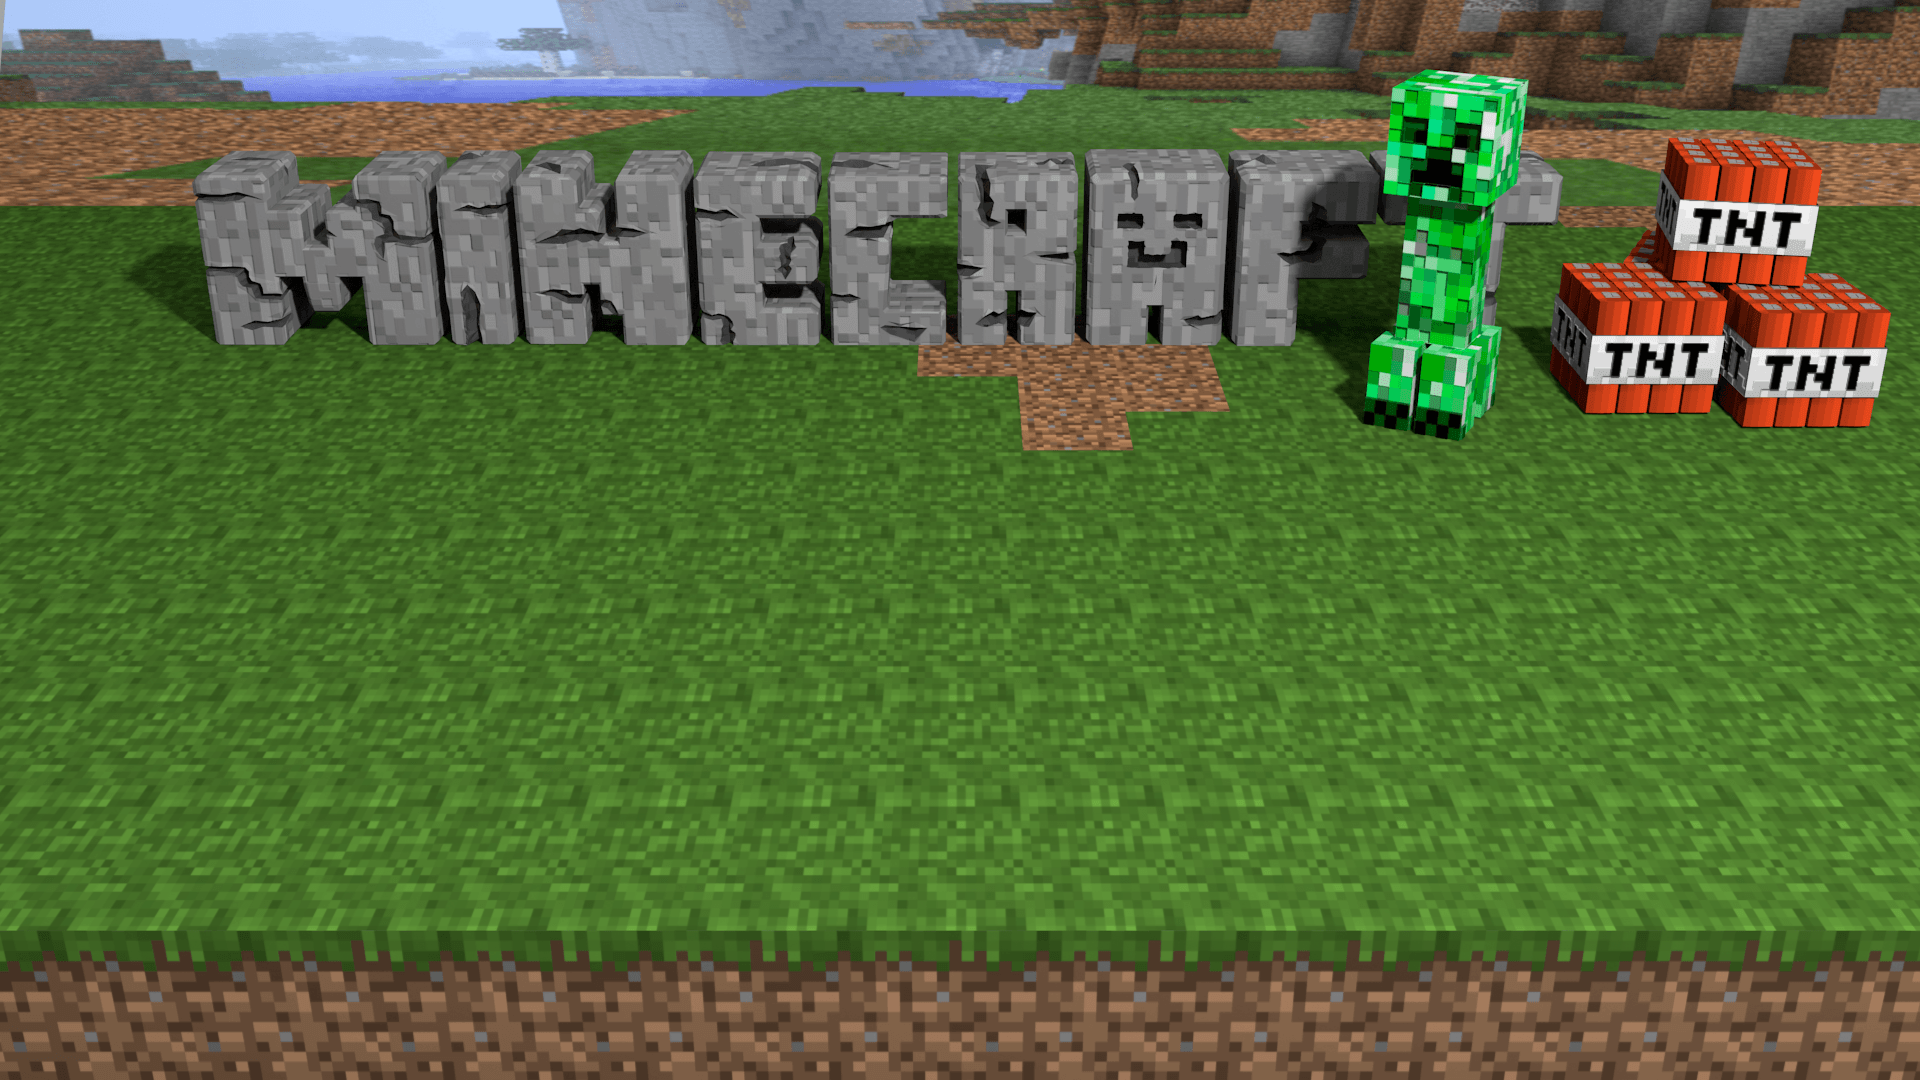 Wallpaper.wiki Minecraft Creeper IPhone Background Free Download PIC